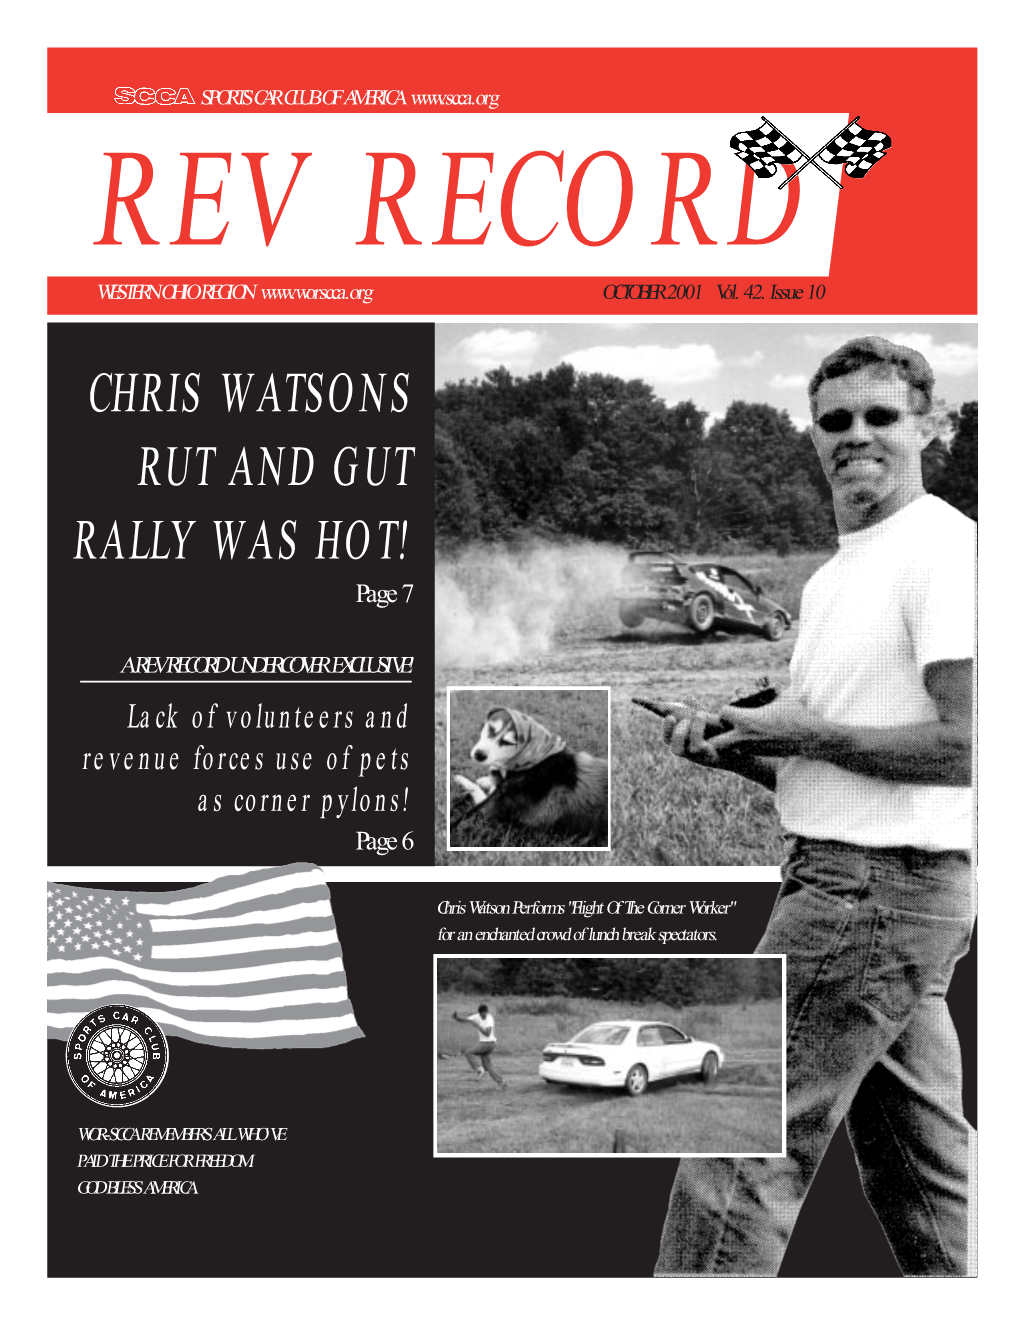 CHRIS WATSONS RUT and GUT RALLY WAS HOT! Page 7